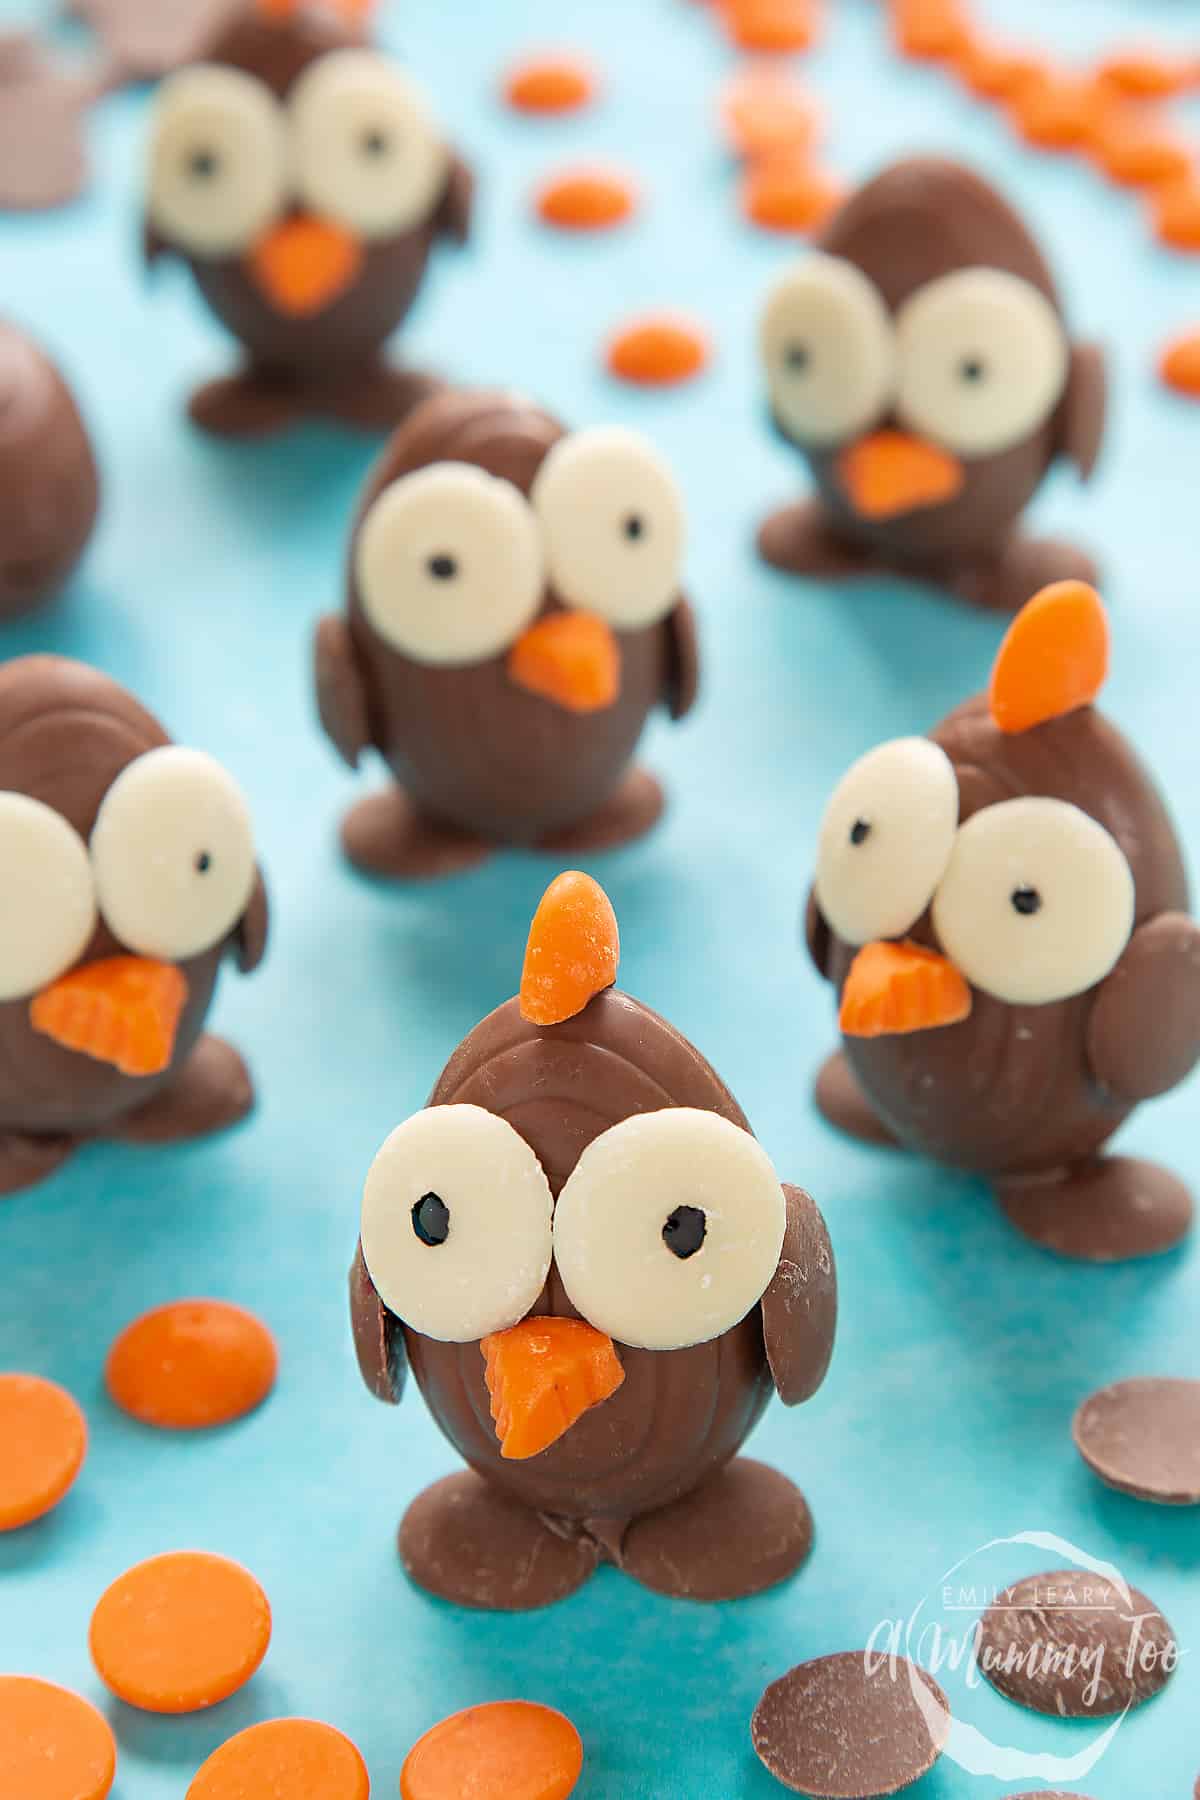 Chocolate chicks made from creme eggs and chocolate buttons, standing on a blue background, surrounded by milk chocolate buttons, white chocolate buttons and chocolate orange buttons. 